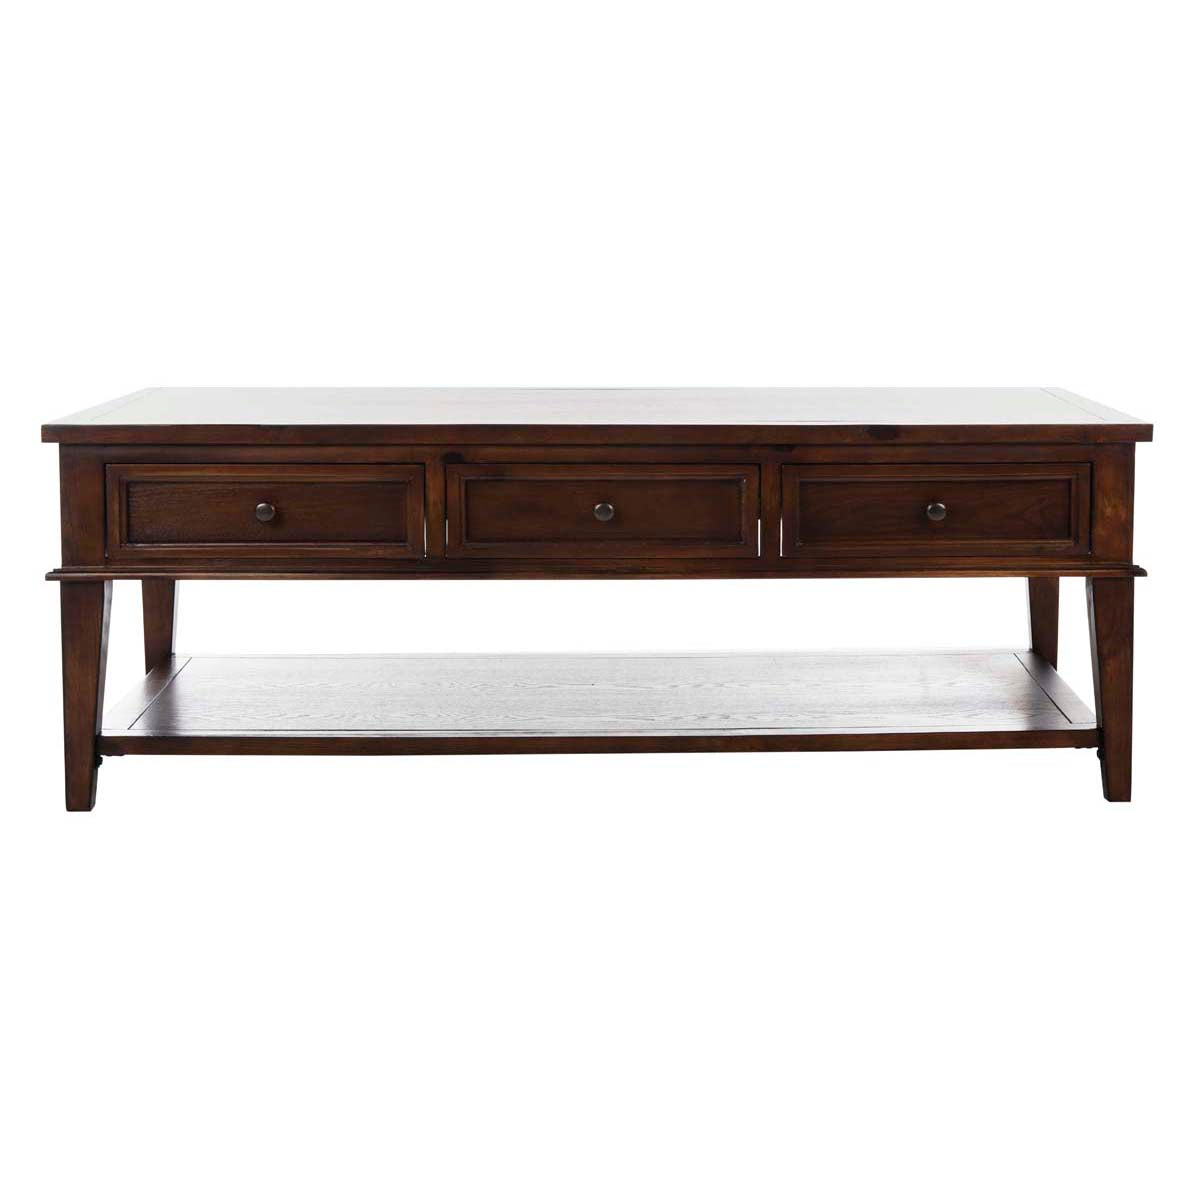 Safavieh Manelin Coffee Table With Storage Drawers , AMH6642 - Sepia